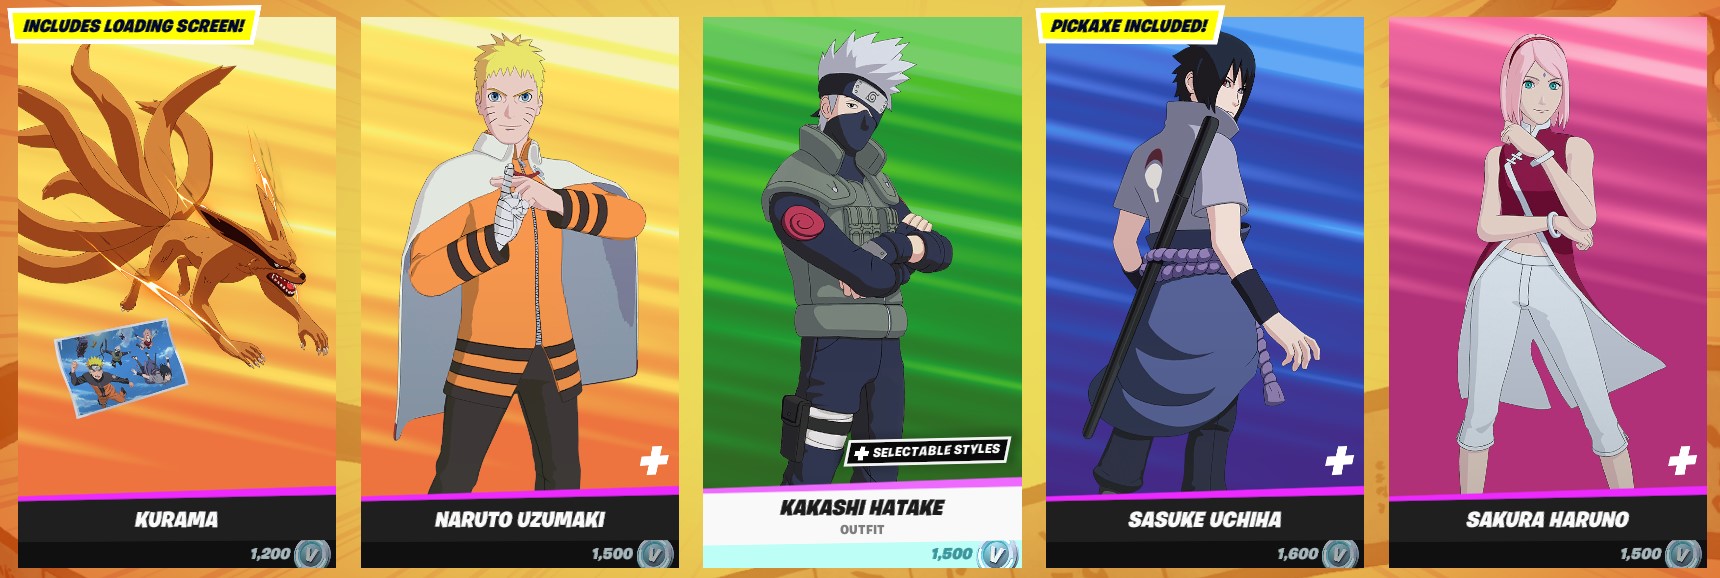 Naruto in Fortnite - outfits, mythical weapon and creative map  